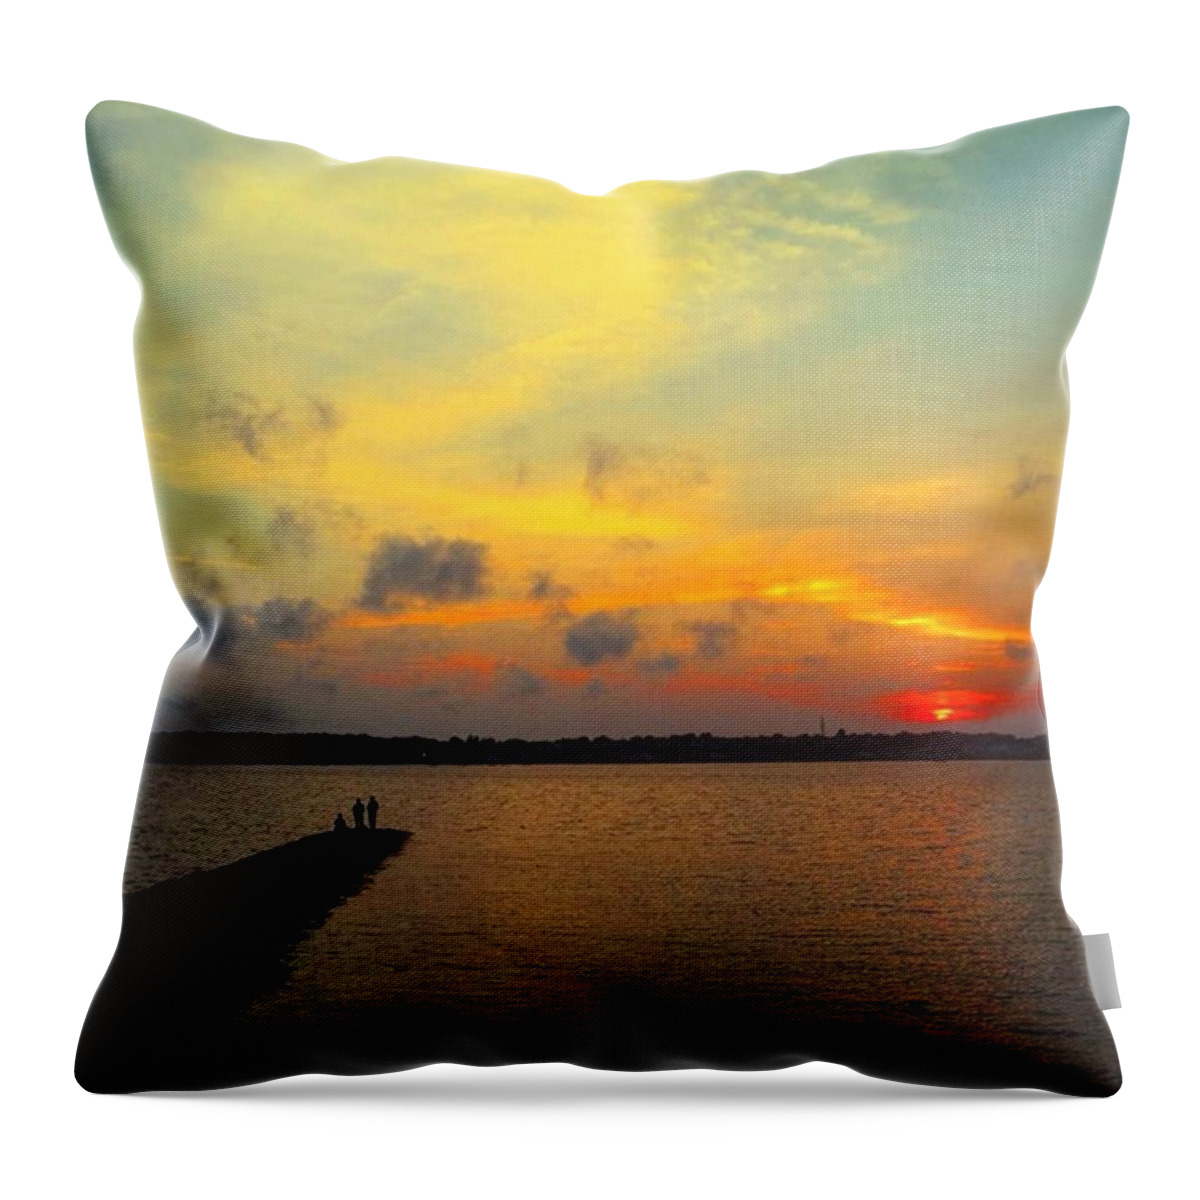 New Bedford Throw Pillow featuring the photograph Nbma #1 by Kate Arsenault 